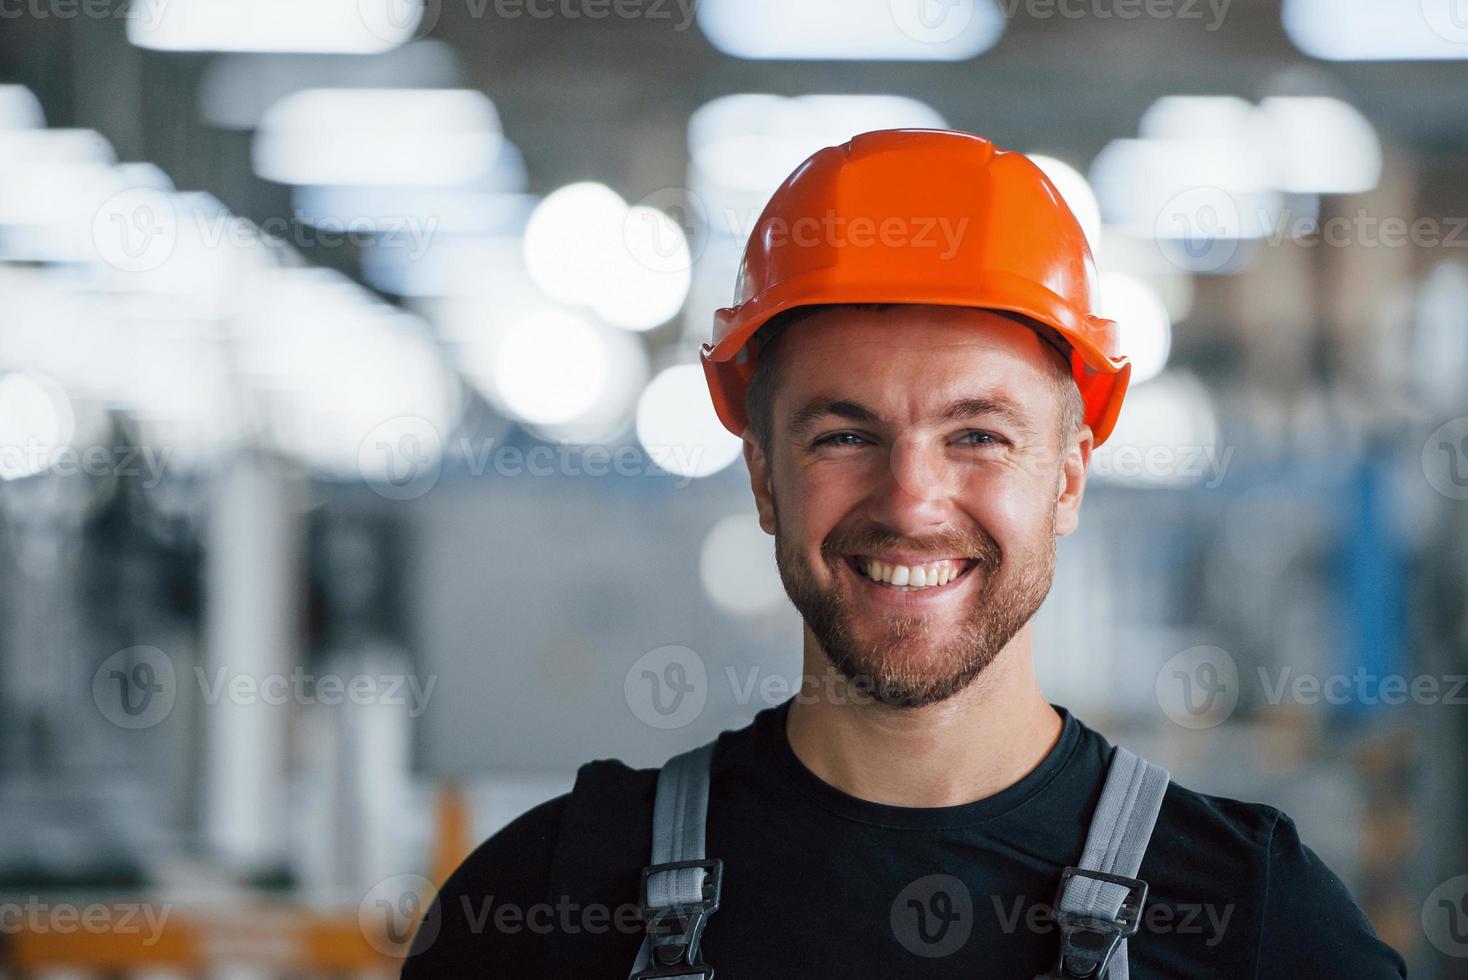 Smiling and happy employee. Portrait of industrial worker indoors in factory. Young technician with orange hard hat photo